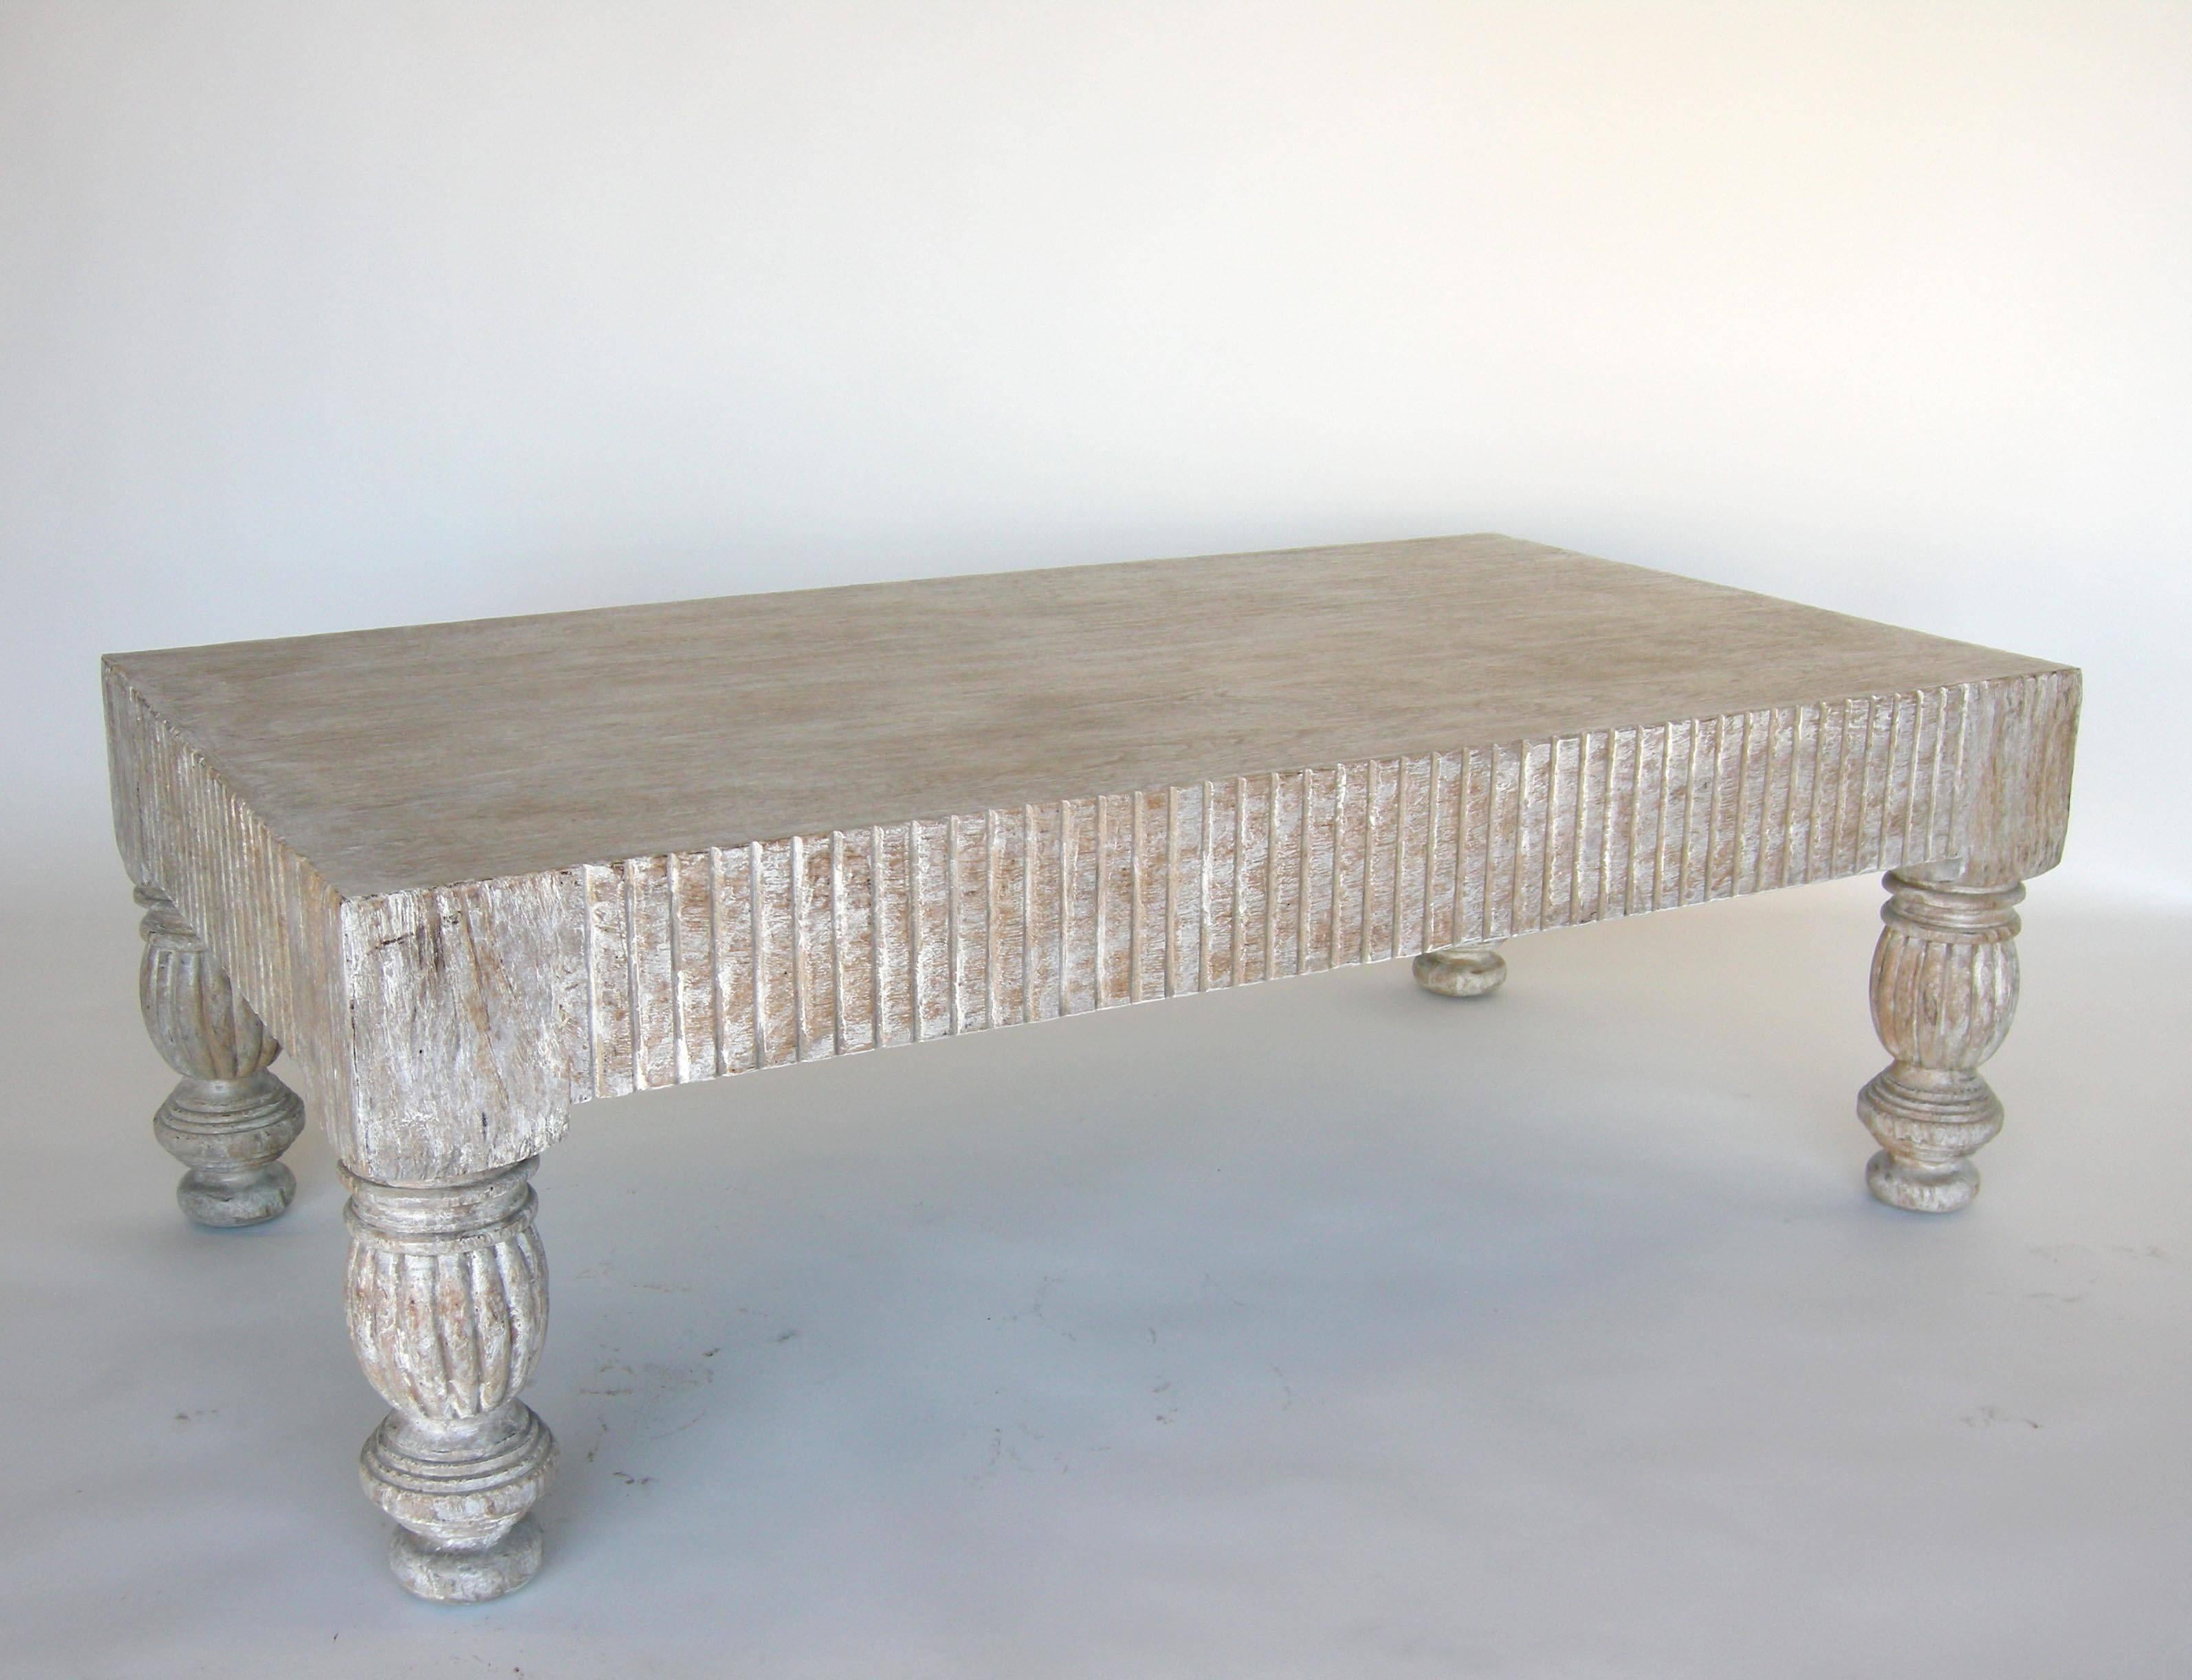 Custom coffee table with fluted apron and carved legs. Can be made in oak, teak, walnut or mahogany in a variety of sizes and finishes. Shown here in teak, with a grey driftwood and white weathered finish. Made in Los Angeles.

As shown 50 x 30 x 20